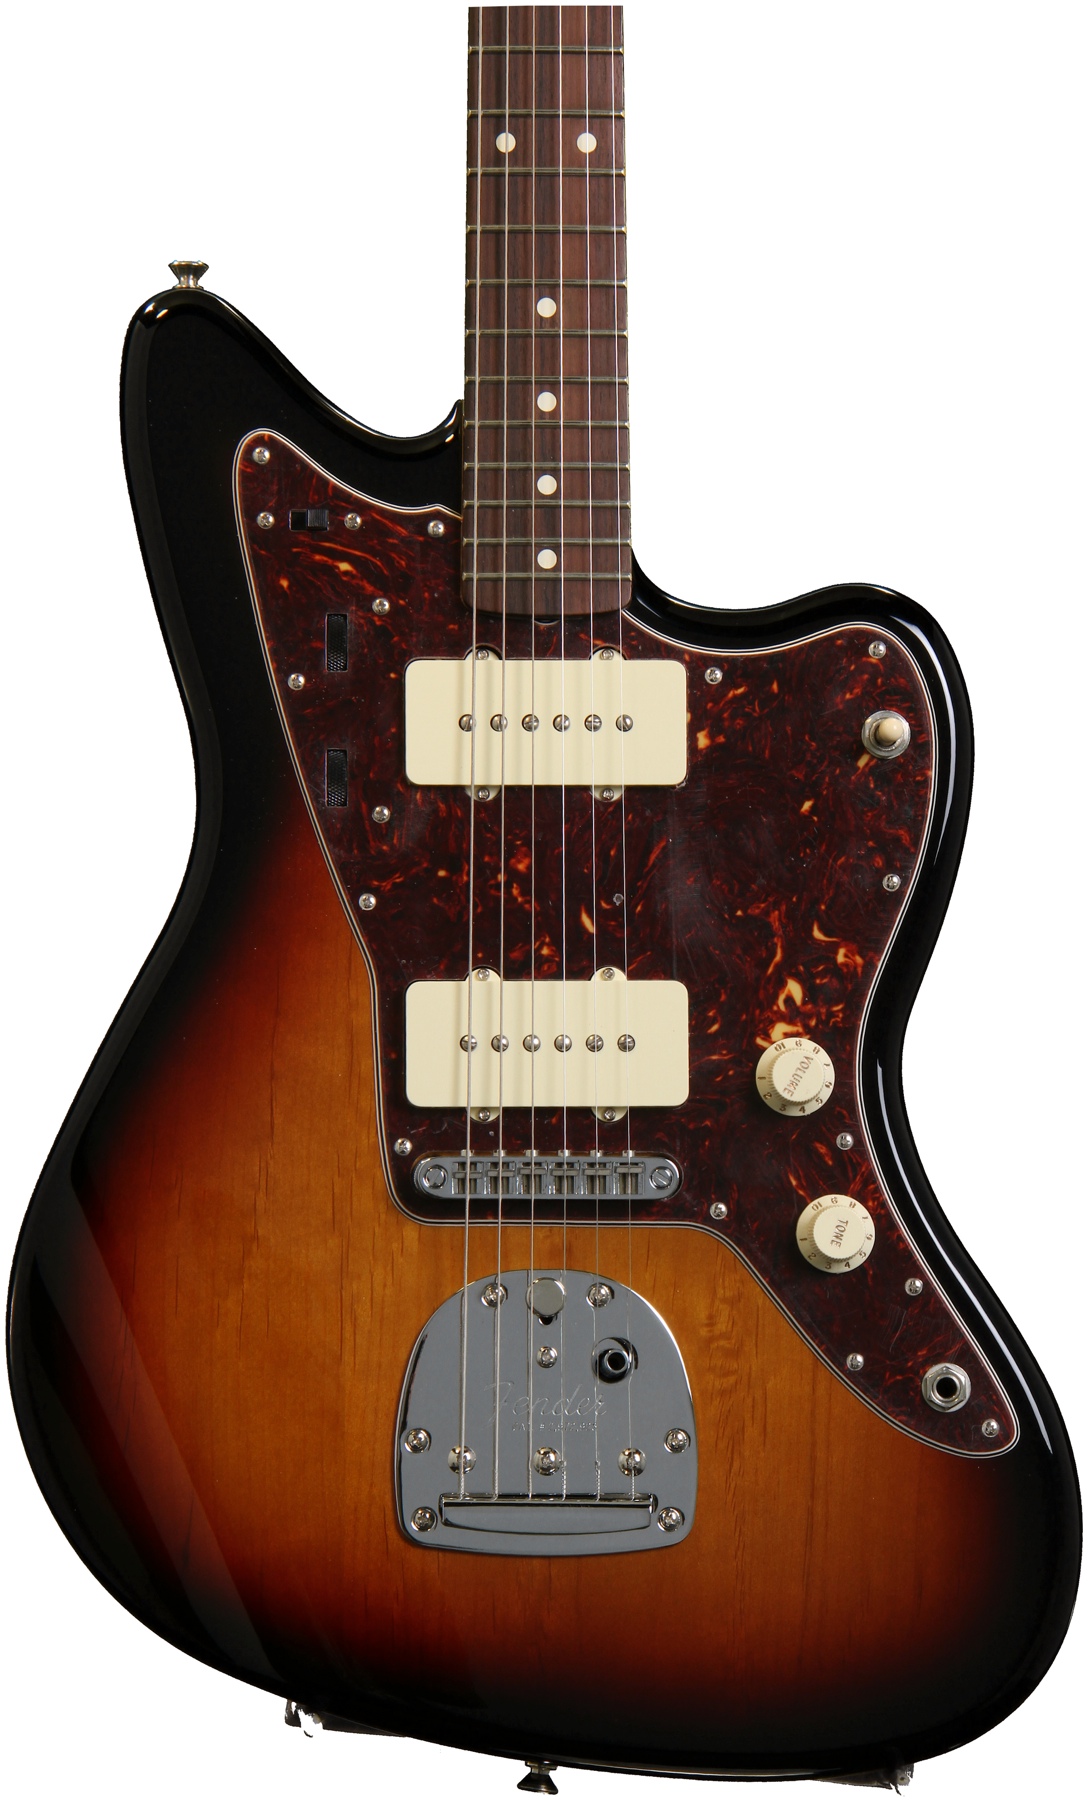 Hot or Not? - New GAS pains - Fender Jazzmaster Classic Player